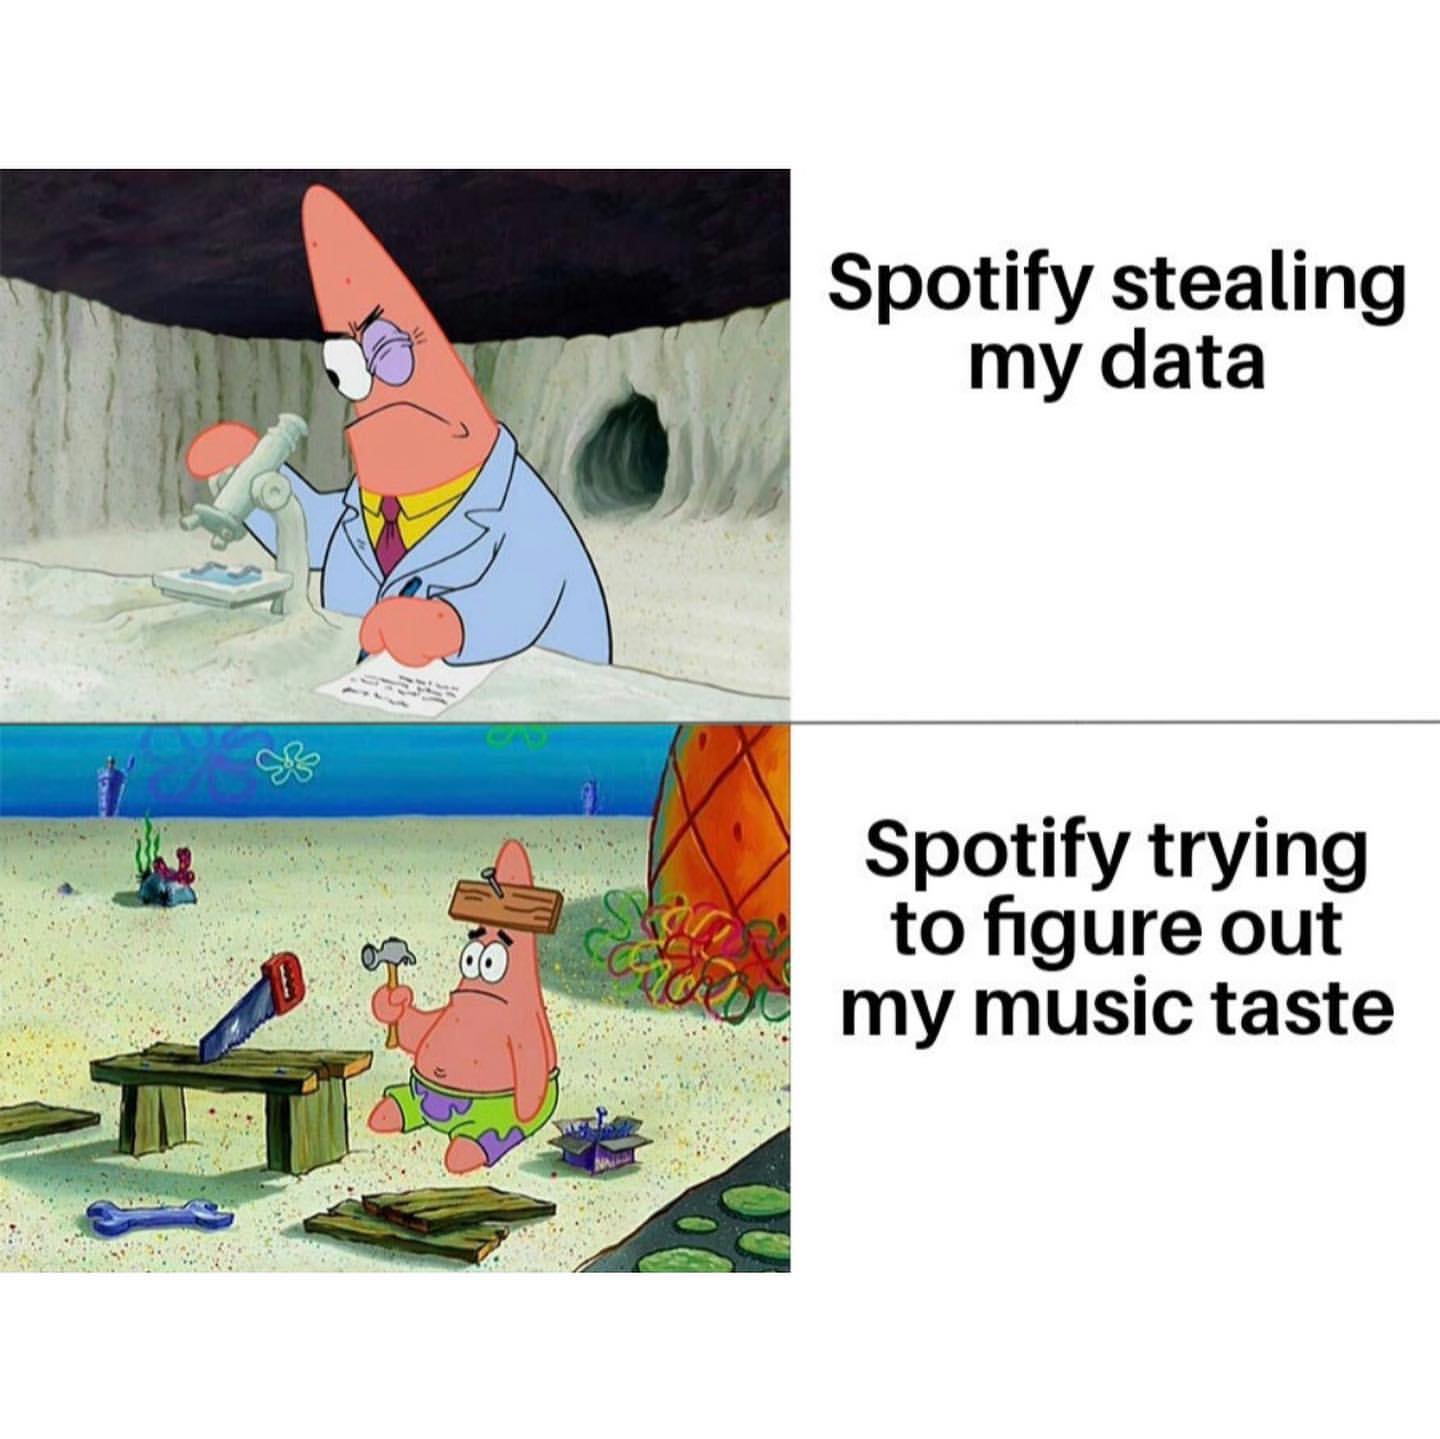 Spotify stealing my data. Spotify trying to figure out my music taste.